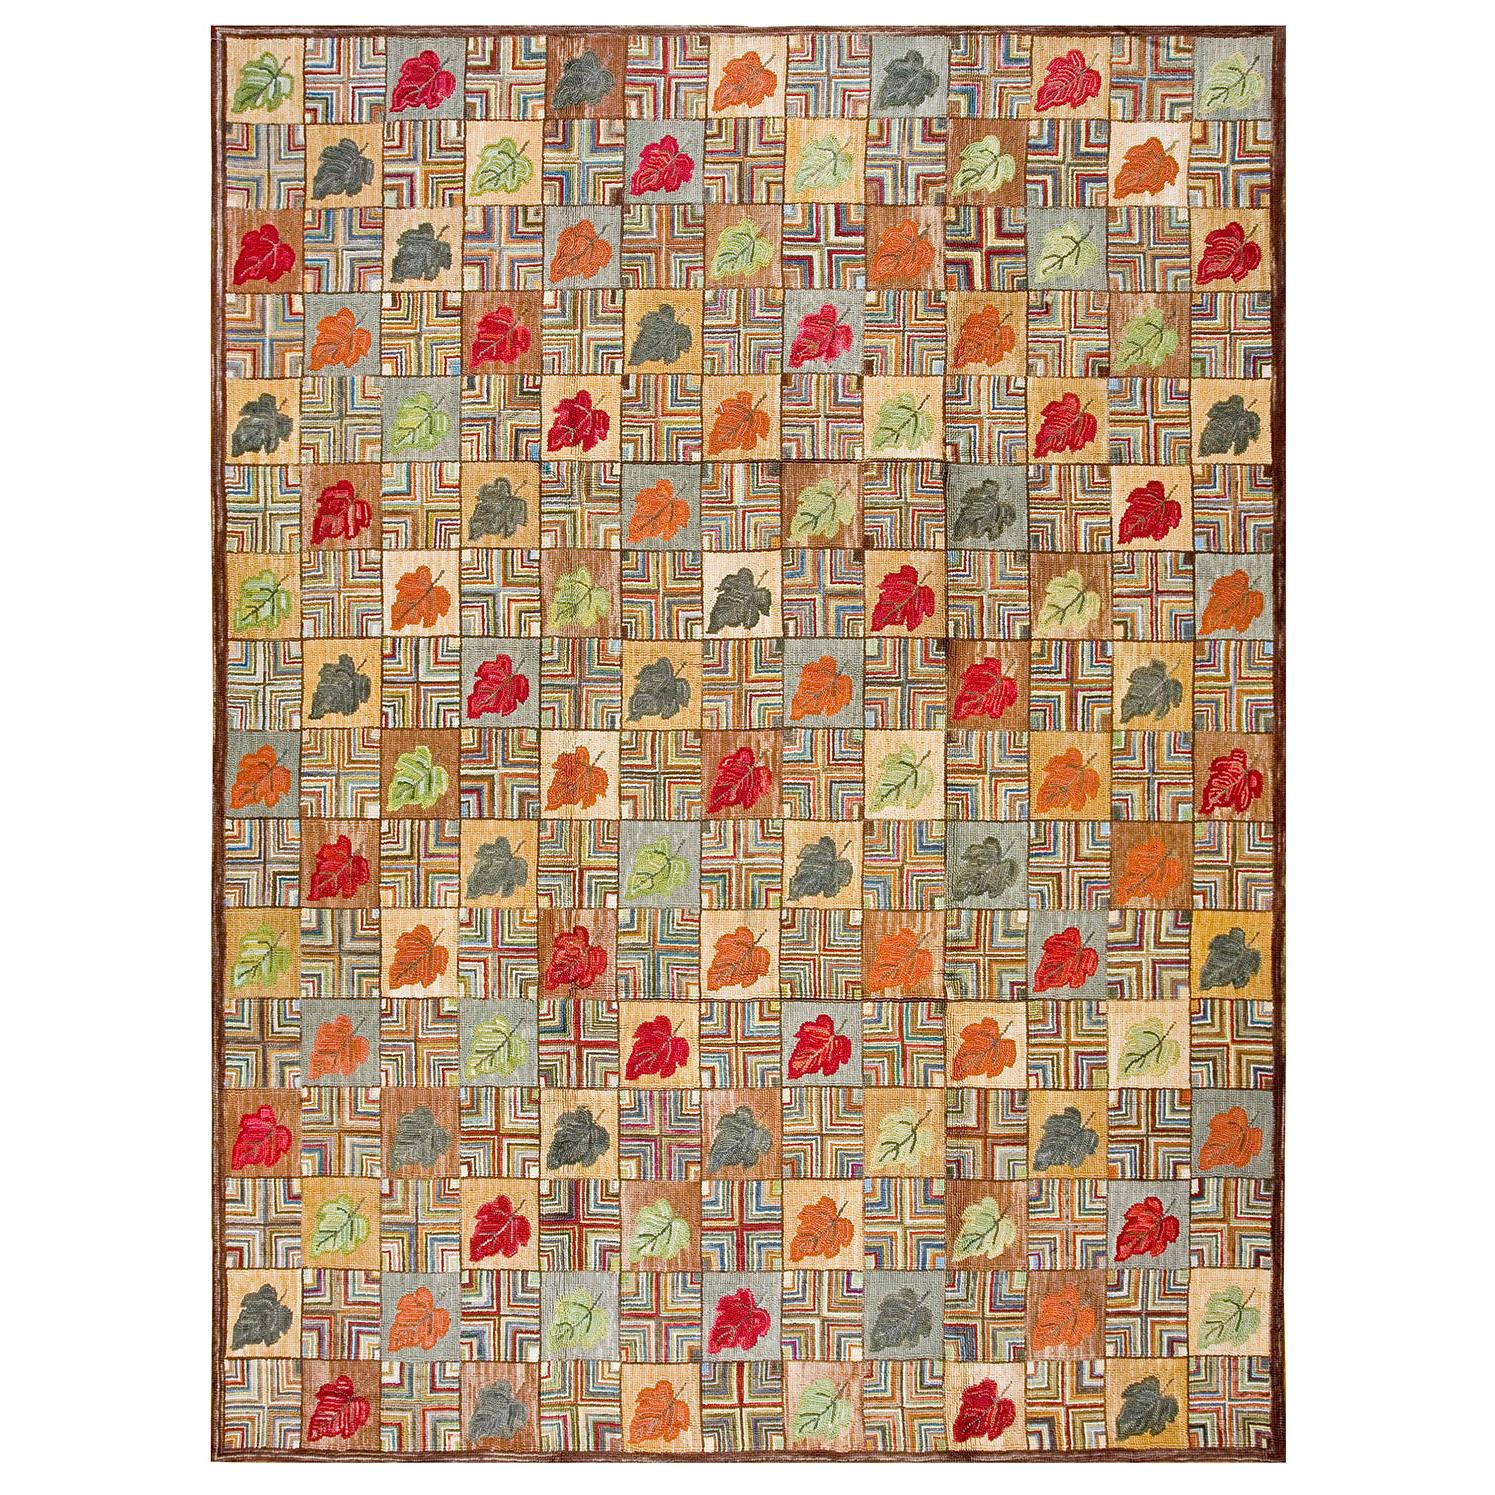 Contemporary American Hooked Rug (6' x 9' - 182 x 274)